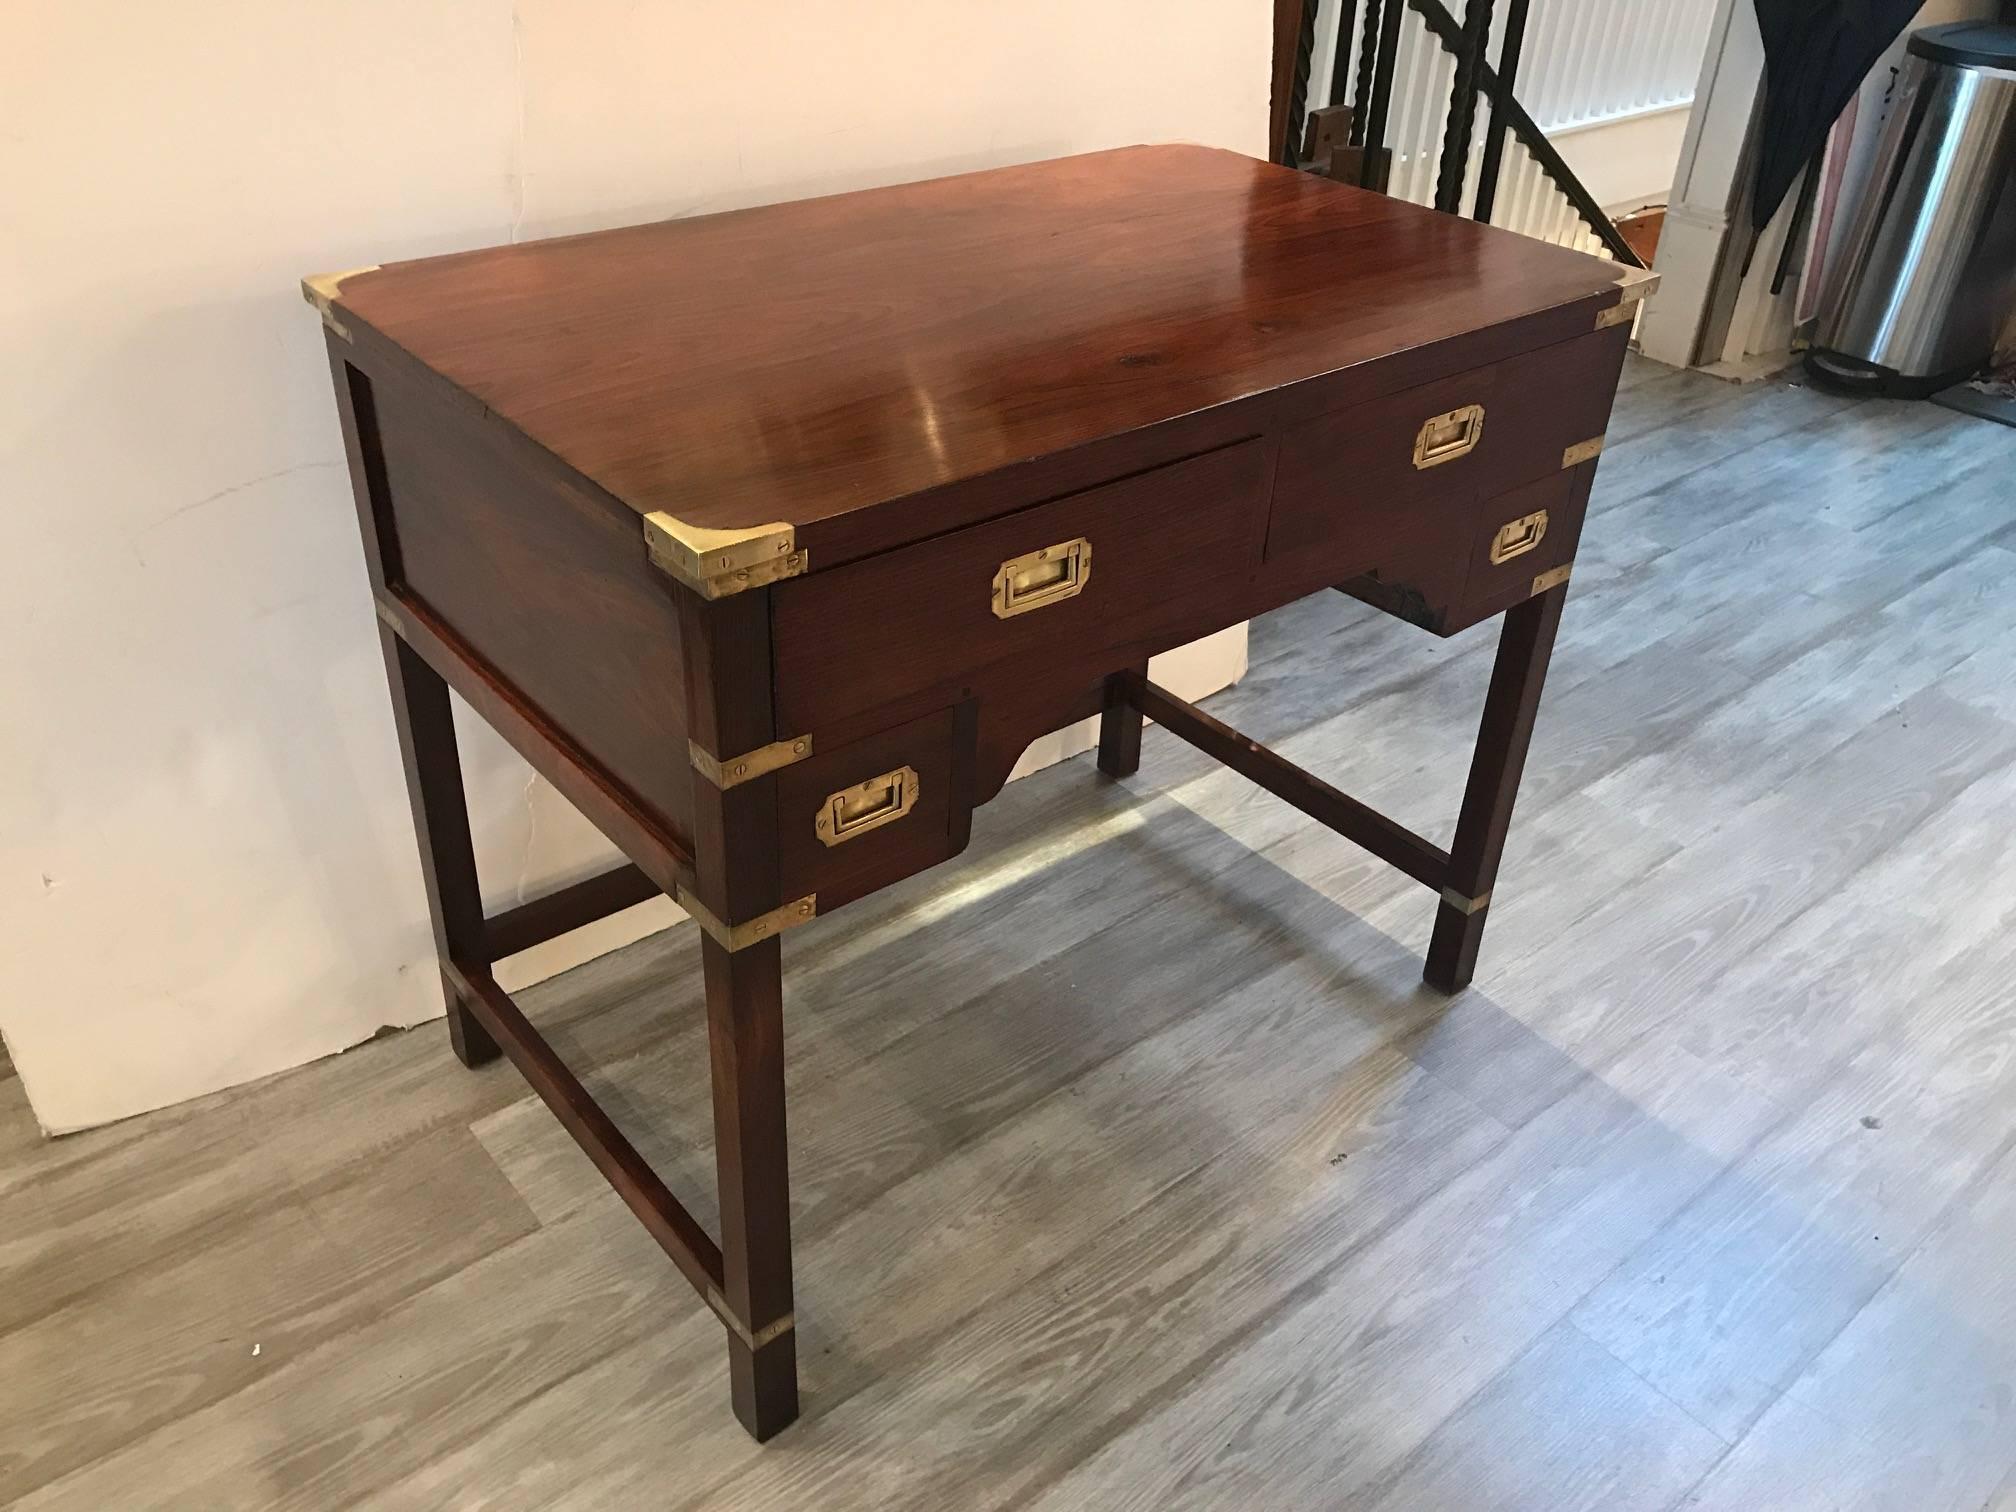 Rosewood campaign desk with brass mounts, dovetailed drawers, mortise and tenon construction with inset brass handles, Anglo-Indian for the European and American market. All the Classic Campaign details.